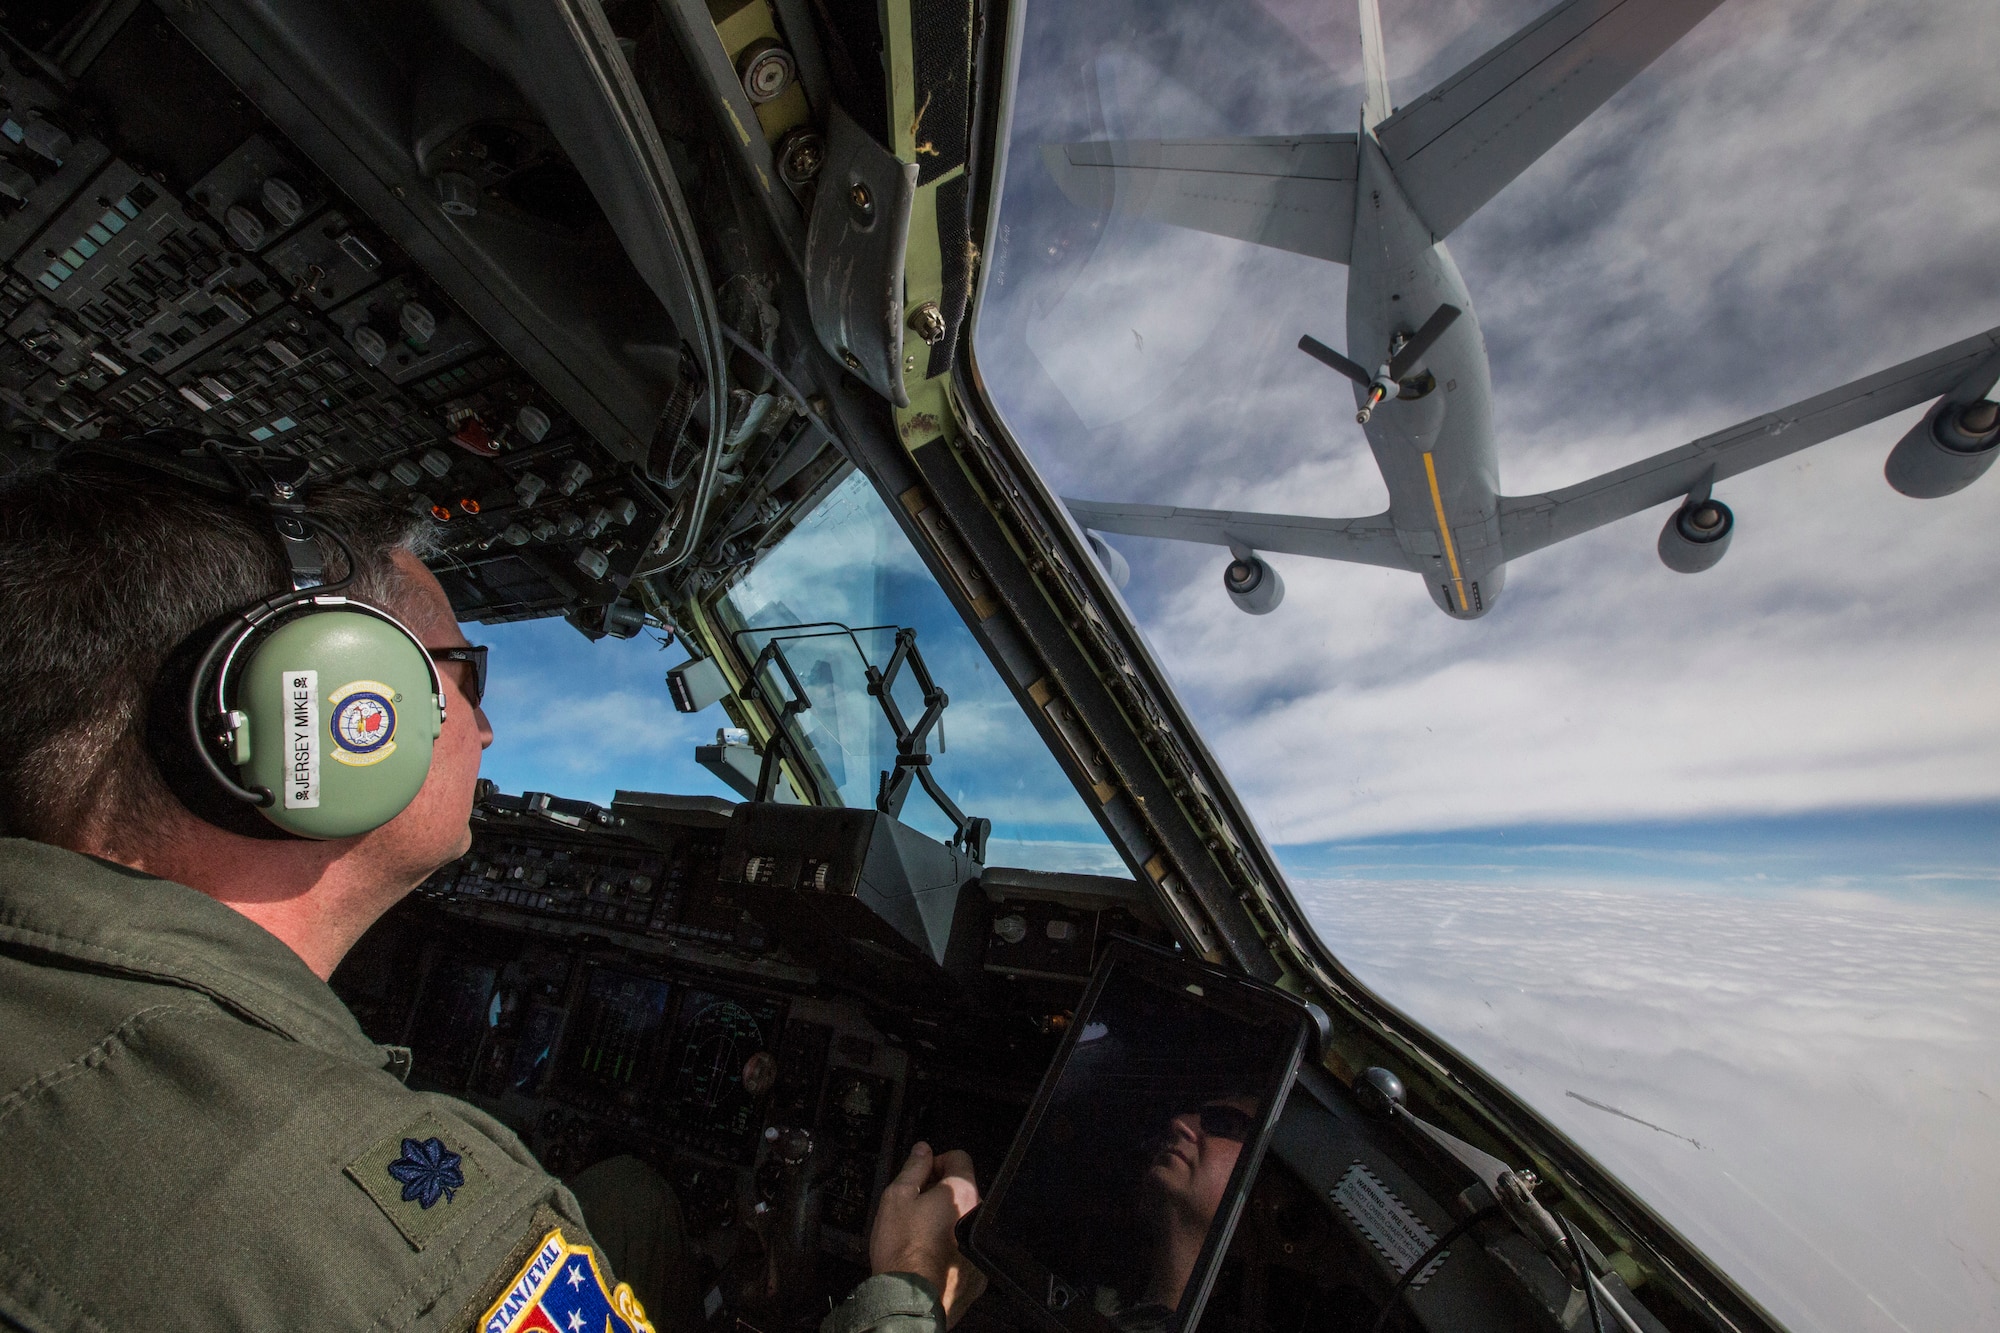 Lt. Col Michael J. Prodeline, a C-17 Globemaster III pilot with the 732nd Airlift Squadron, 514th Air Mobility Wing, maneuvers the C-17 in to be refueled by a KC-135 Stratotanker with the 157th Air Refueling Wing, New Hampshire Air National Guard, over the U.S. Feb. 22, 2018. The 514th AMW is an Air Force Reserve Command unit located at Joint Base McGuire-Dix-Lakehurst, N.J. The 157th ARW is located at Pease Air National Guard Base, N.H. (U.S. Air Force photo by Master Sgt. Mark C. Olsen)